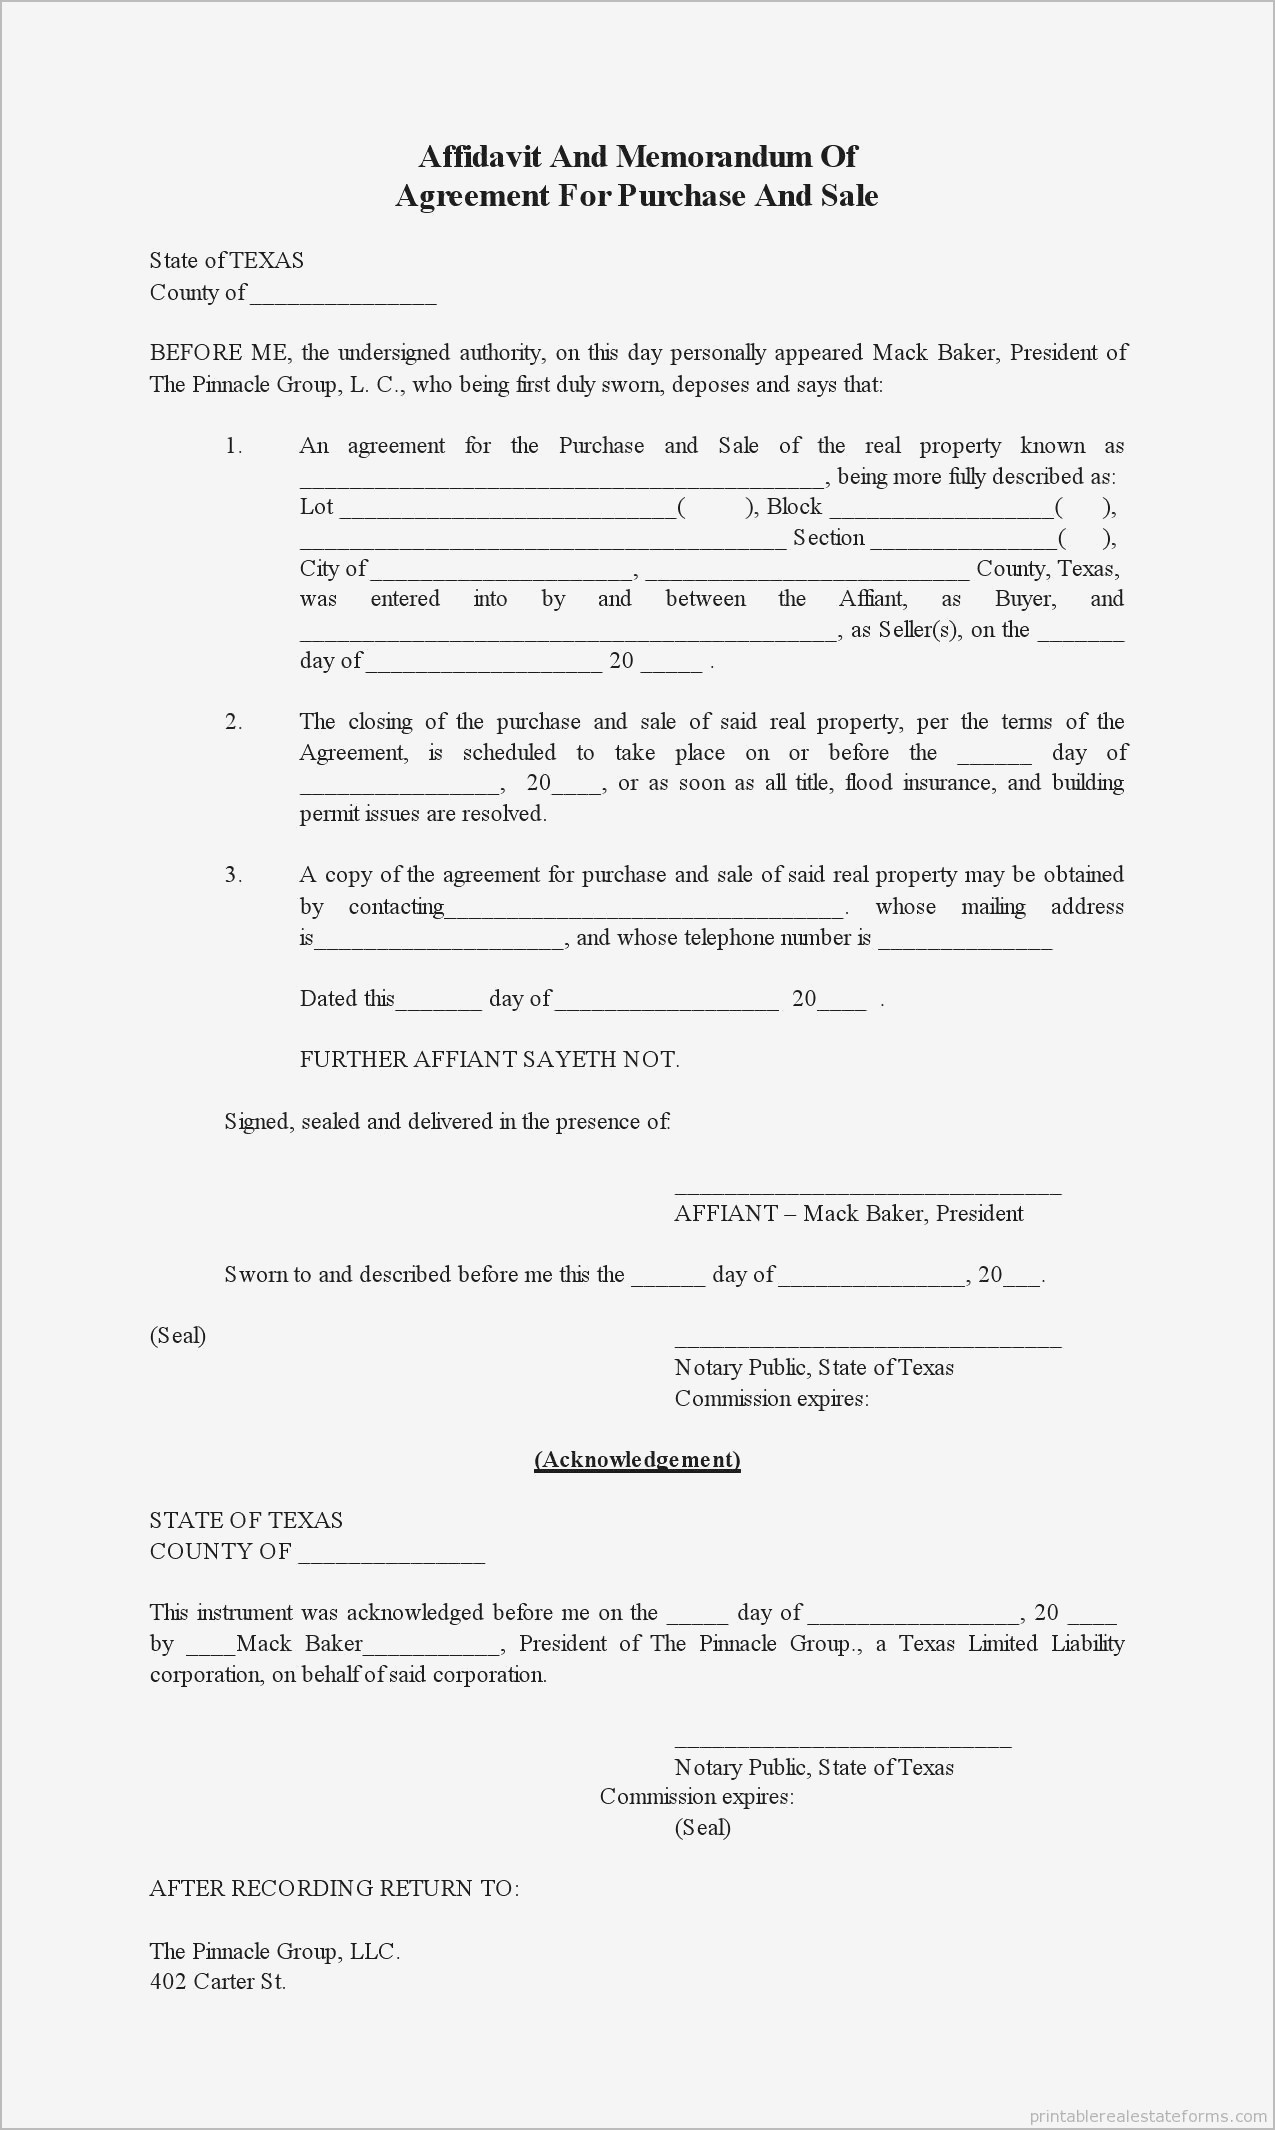 Buy Sell Agreement Llc 018 Buy Sell Agreement Template Ideas Best Of Sample Printable